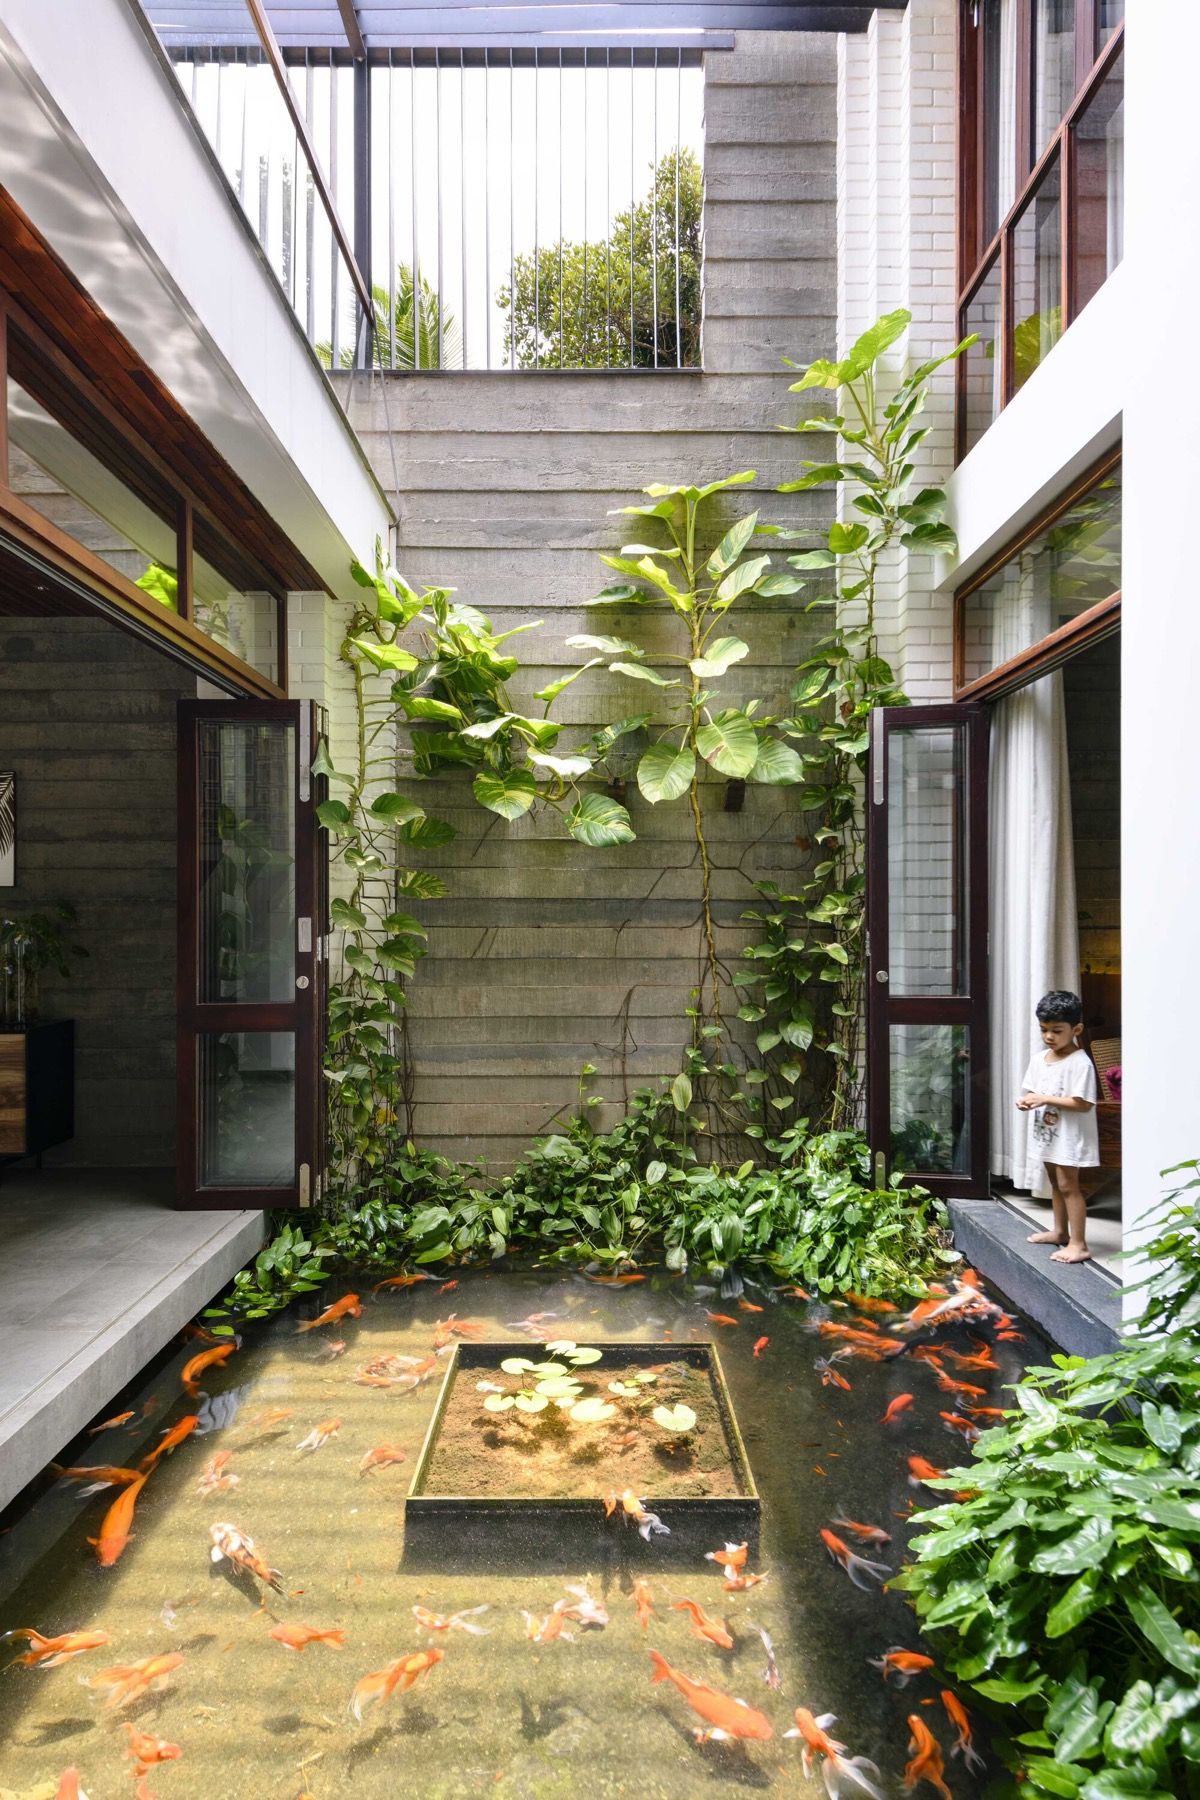 Most And Indoor Courtyards Discover the Benefits of Having Your Own Private Courtyard Retreat at Home